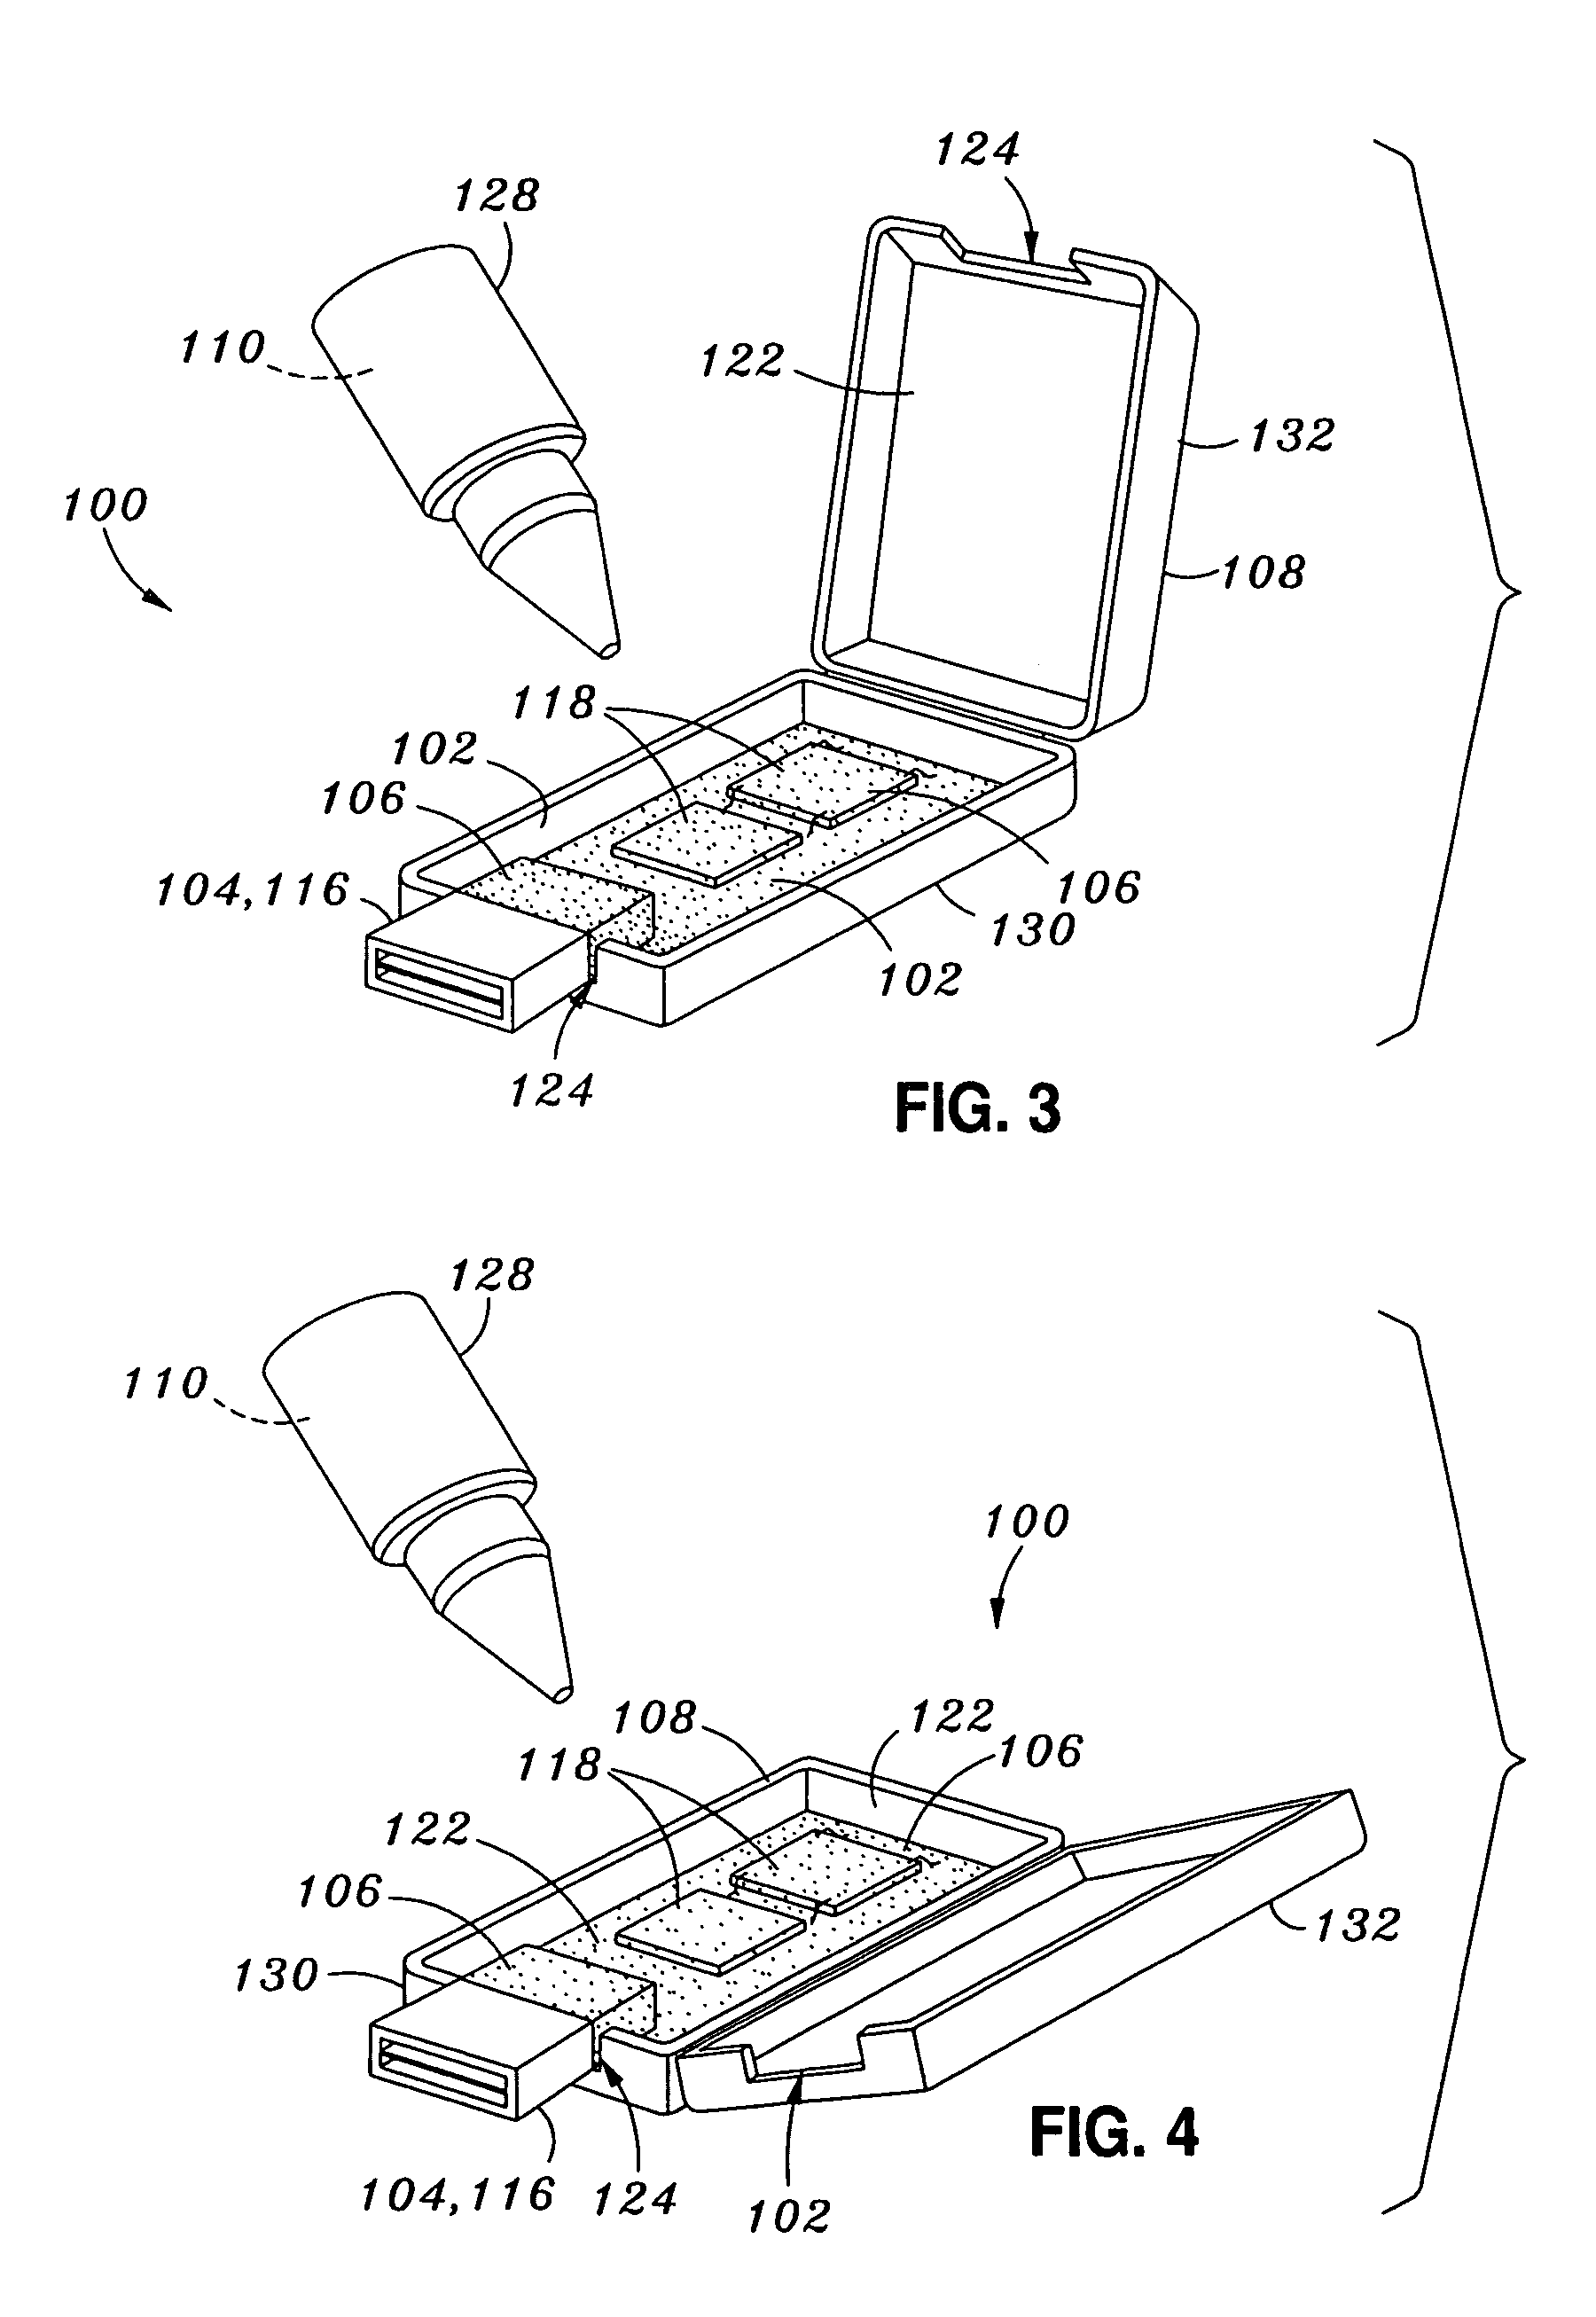 Waterproof USB drives and method of making